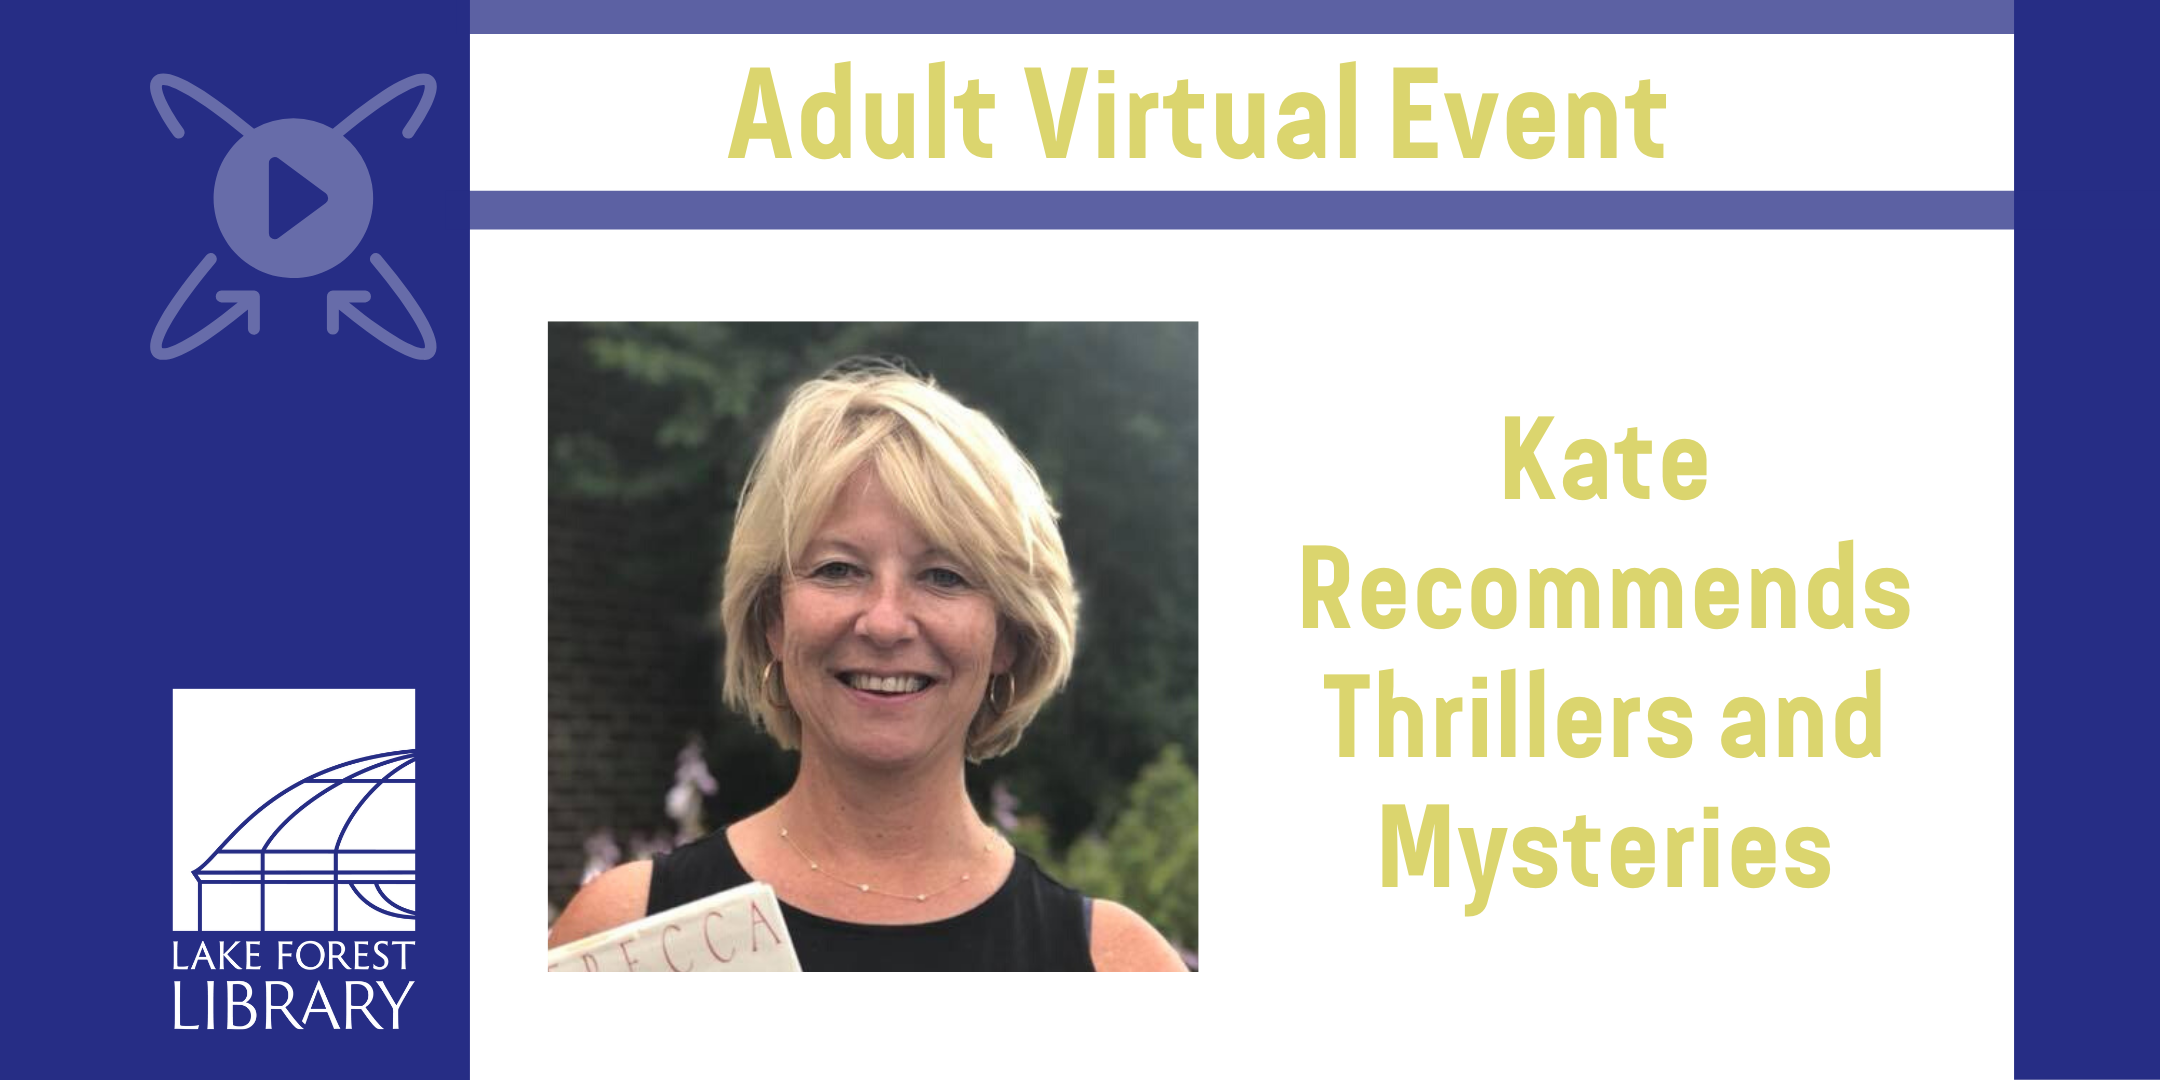 Kate Recommends Thrillers and Mysteries